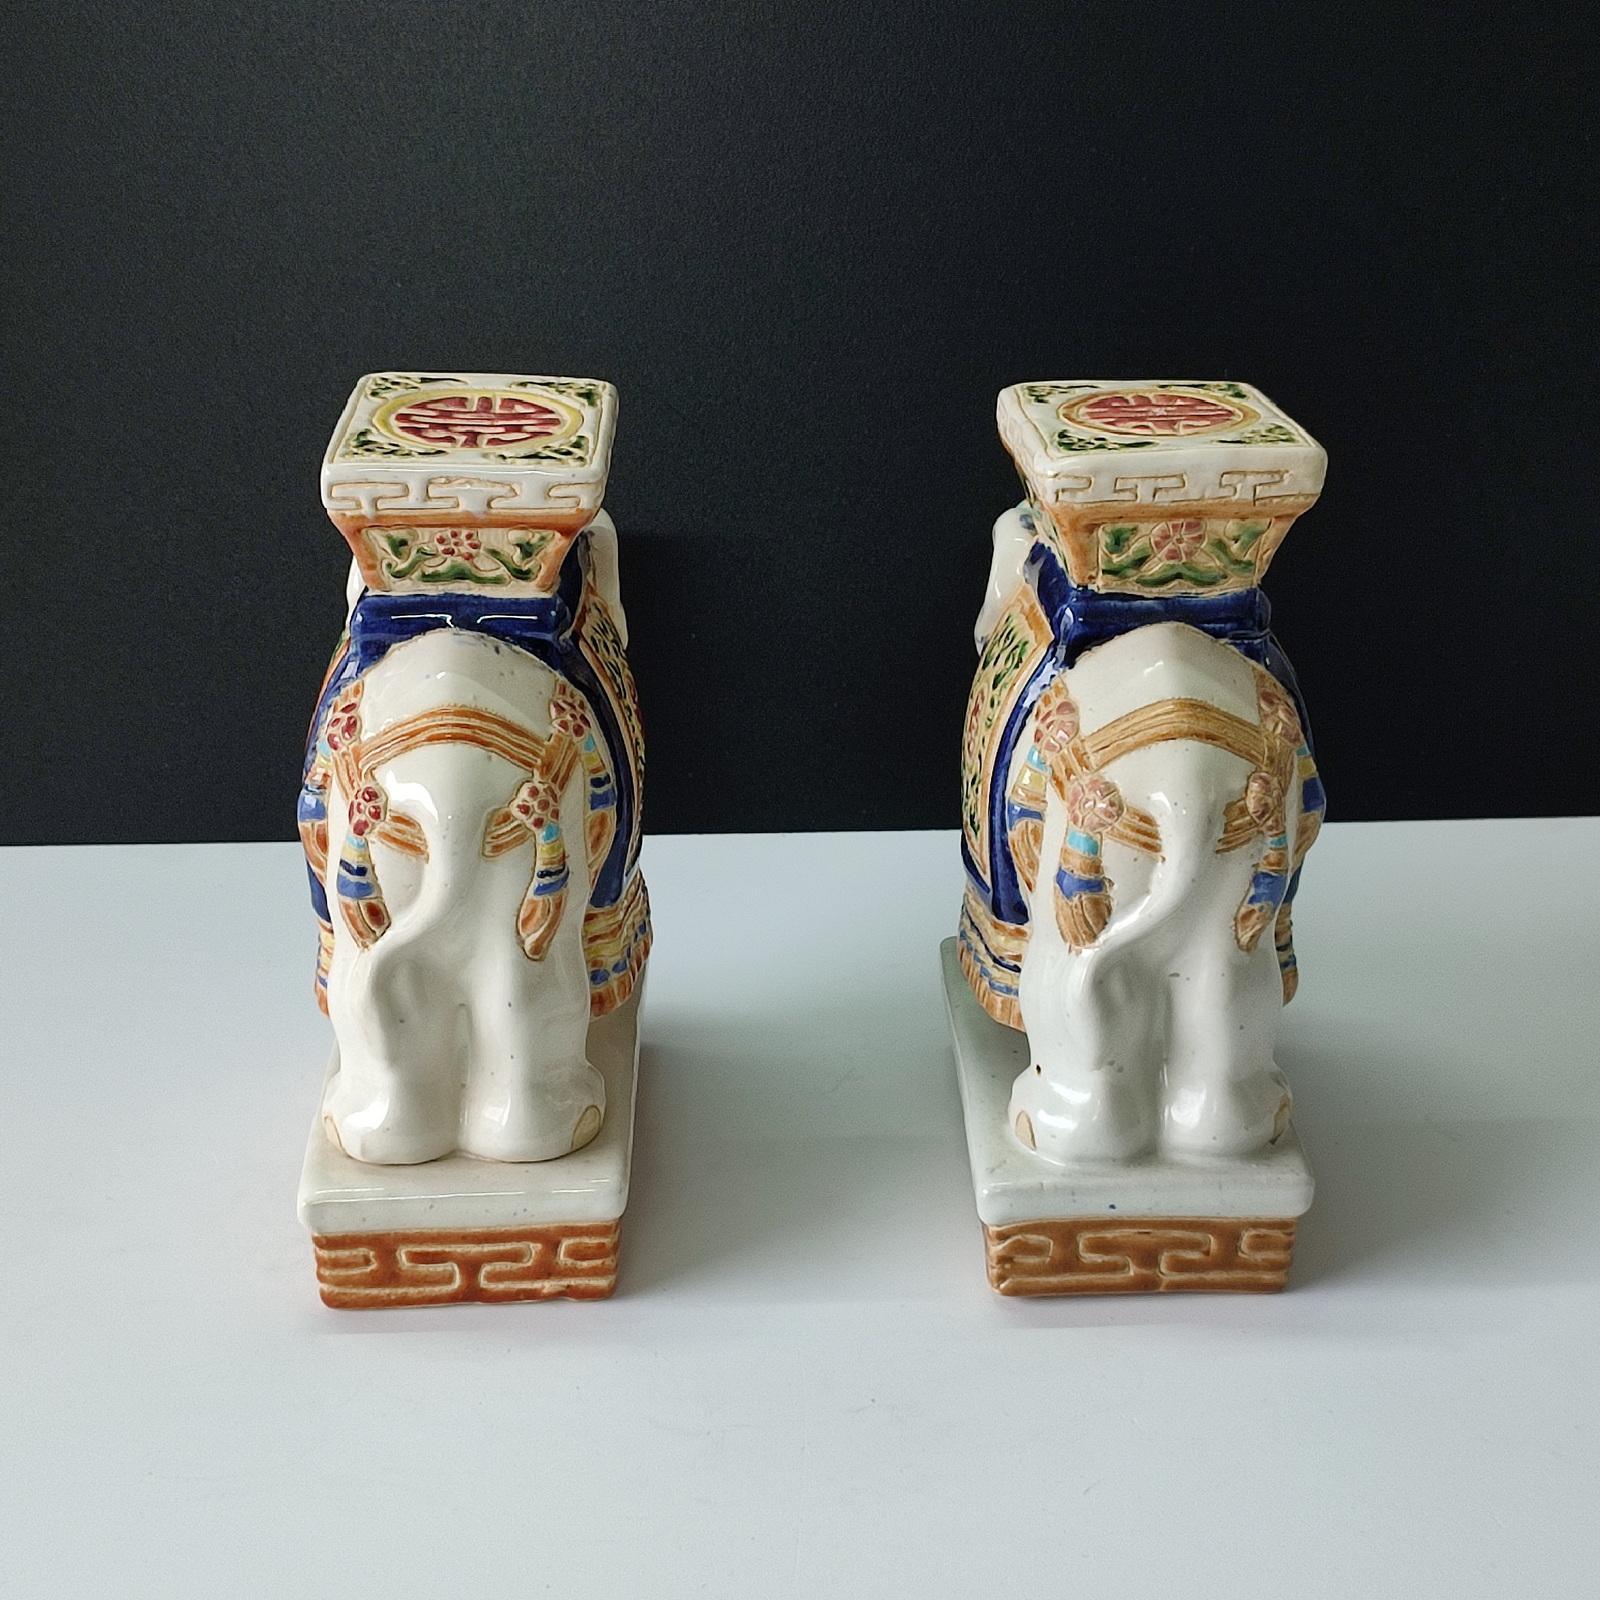 Pair of Polychrome Ceramic Elephant Plant Holder, Bookends, Mid 20th Century For Sale 1